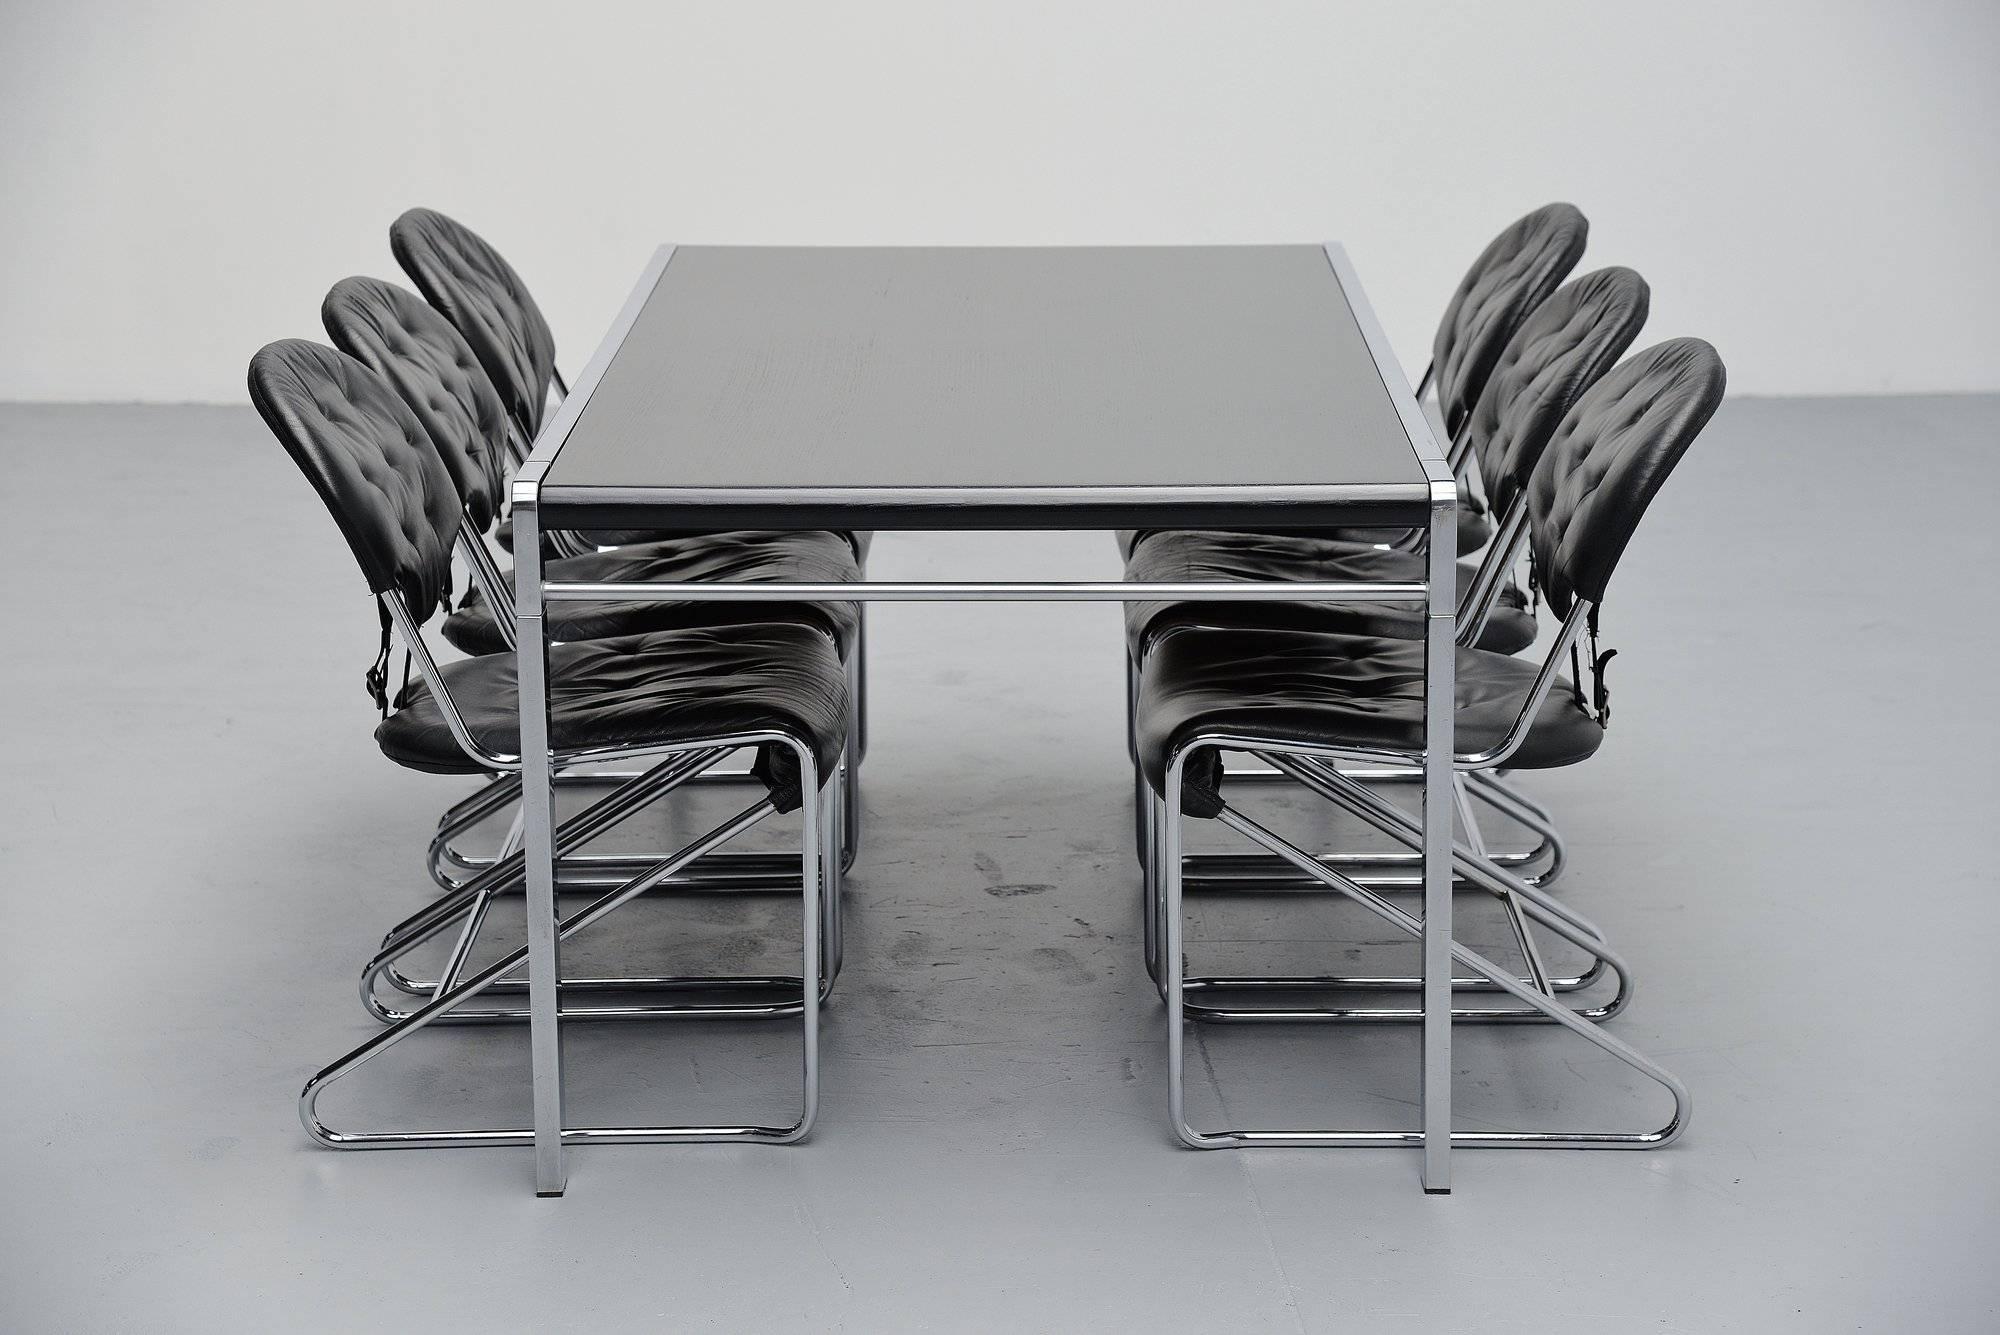 Elegant and timeless dining table model TE21/Anvers, designed by Claire Bataille and Paul Ibens, manufactured by 't Spectrum Bergeijk, Holland, 1971. The table has a polished aluminum frame and a black painted wooden top. The table can use up to six